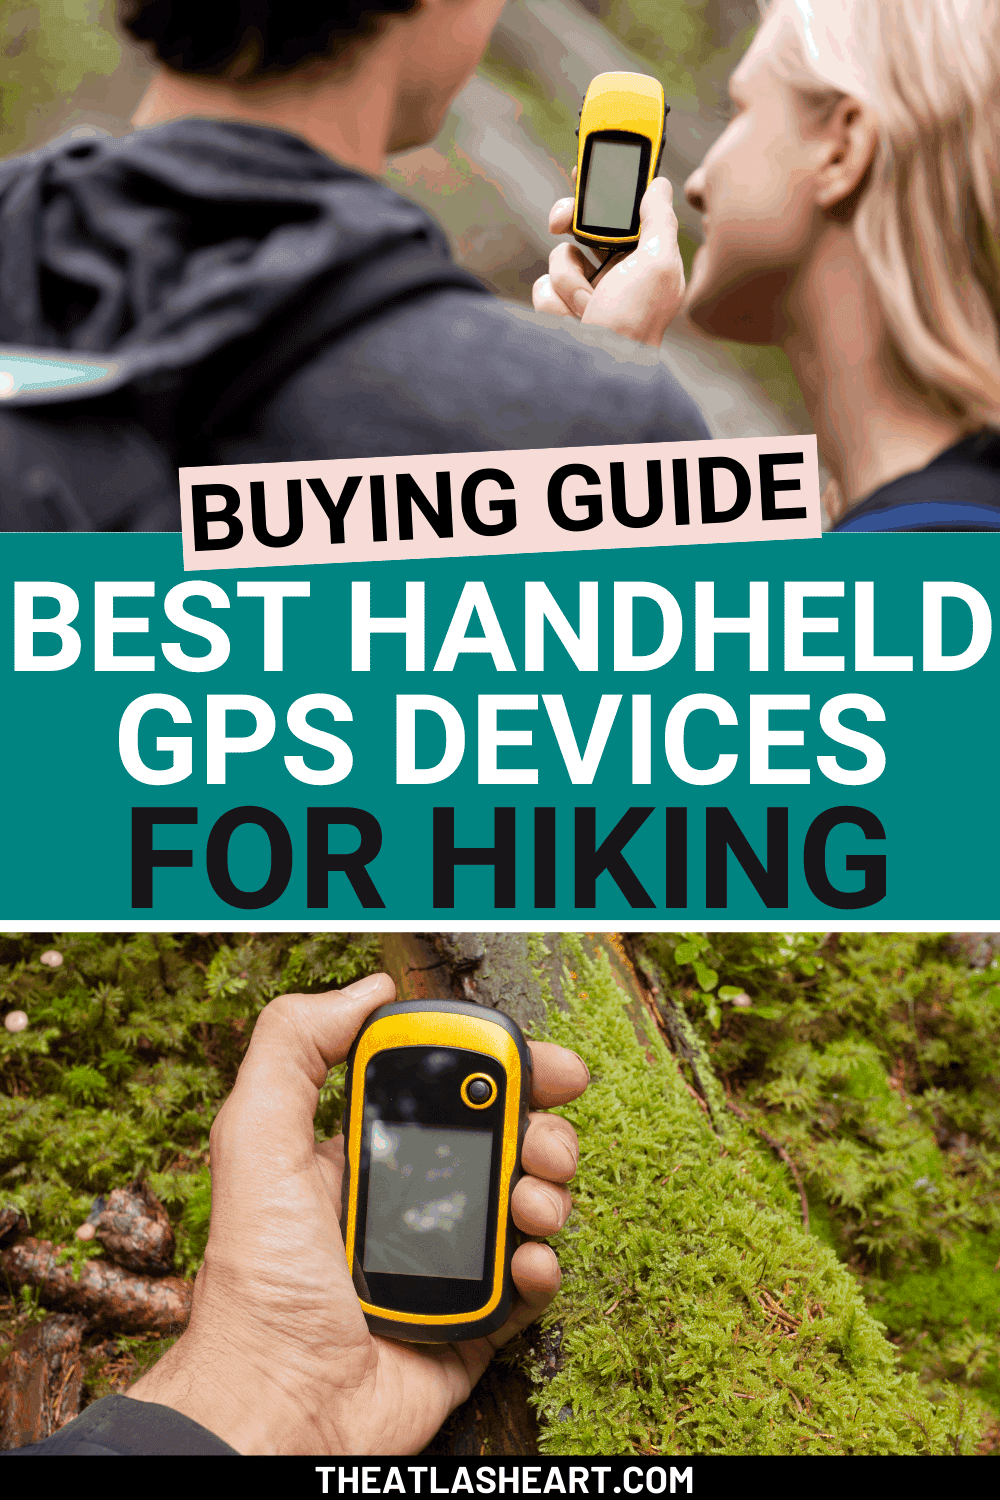 8 Best Handheld GPS Devices for Hiking (2023 Buying Guide)